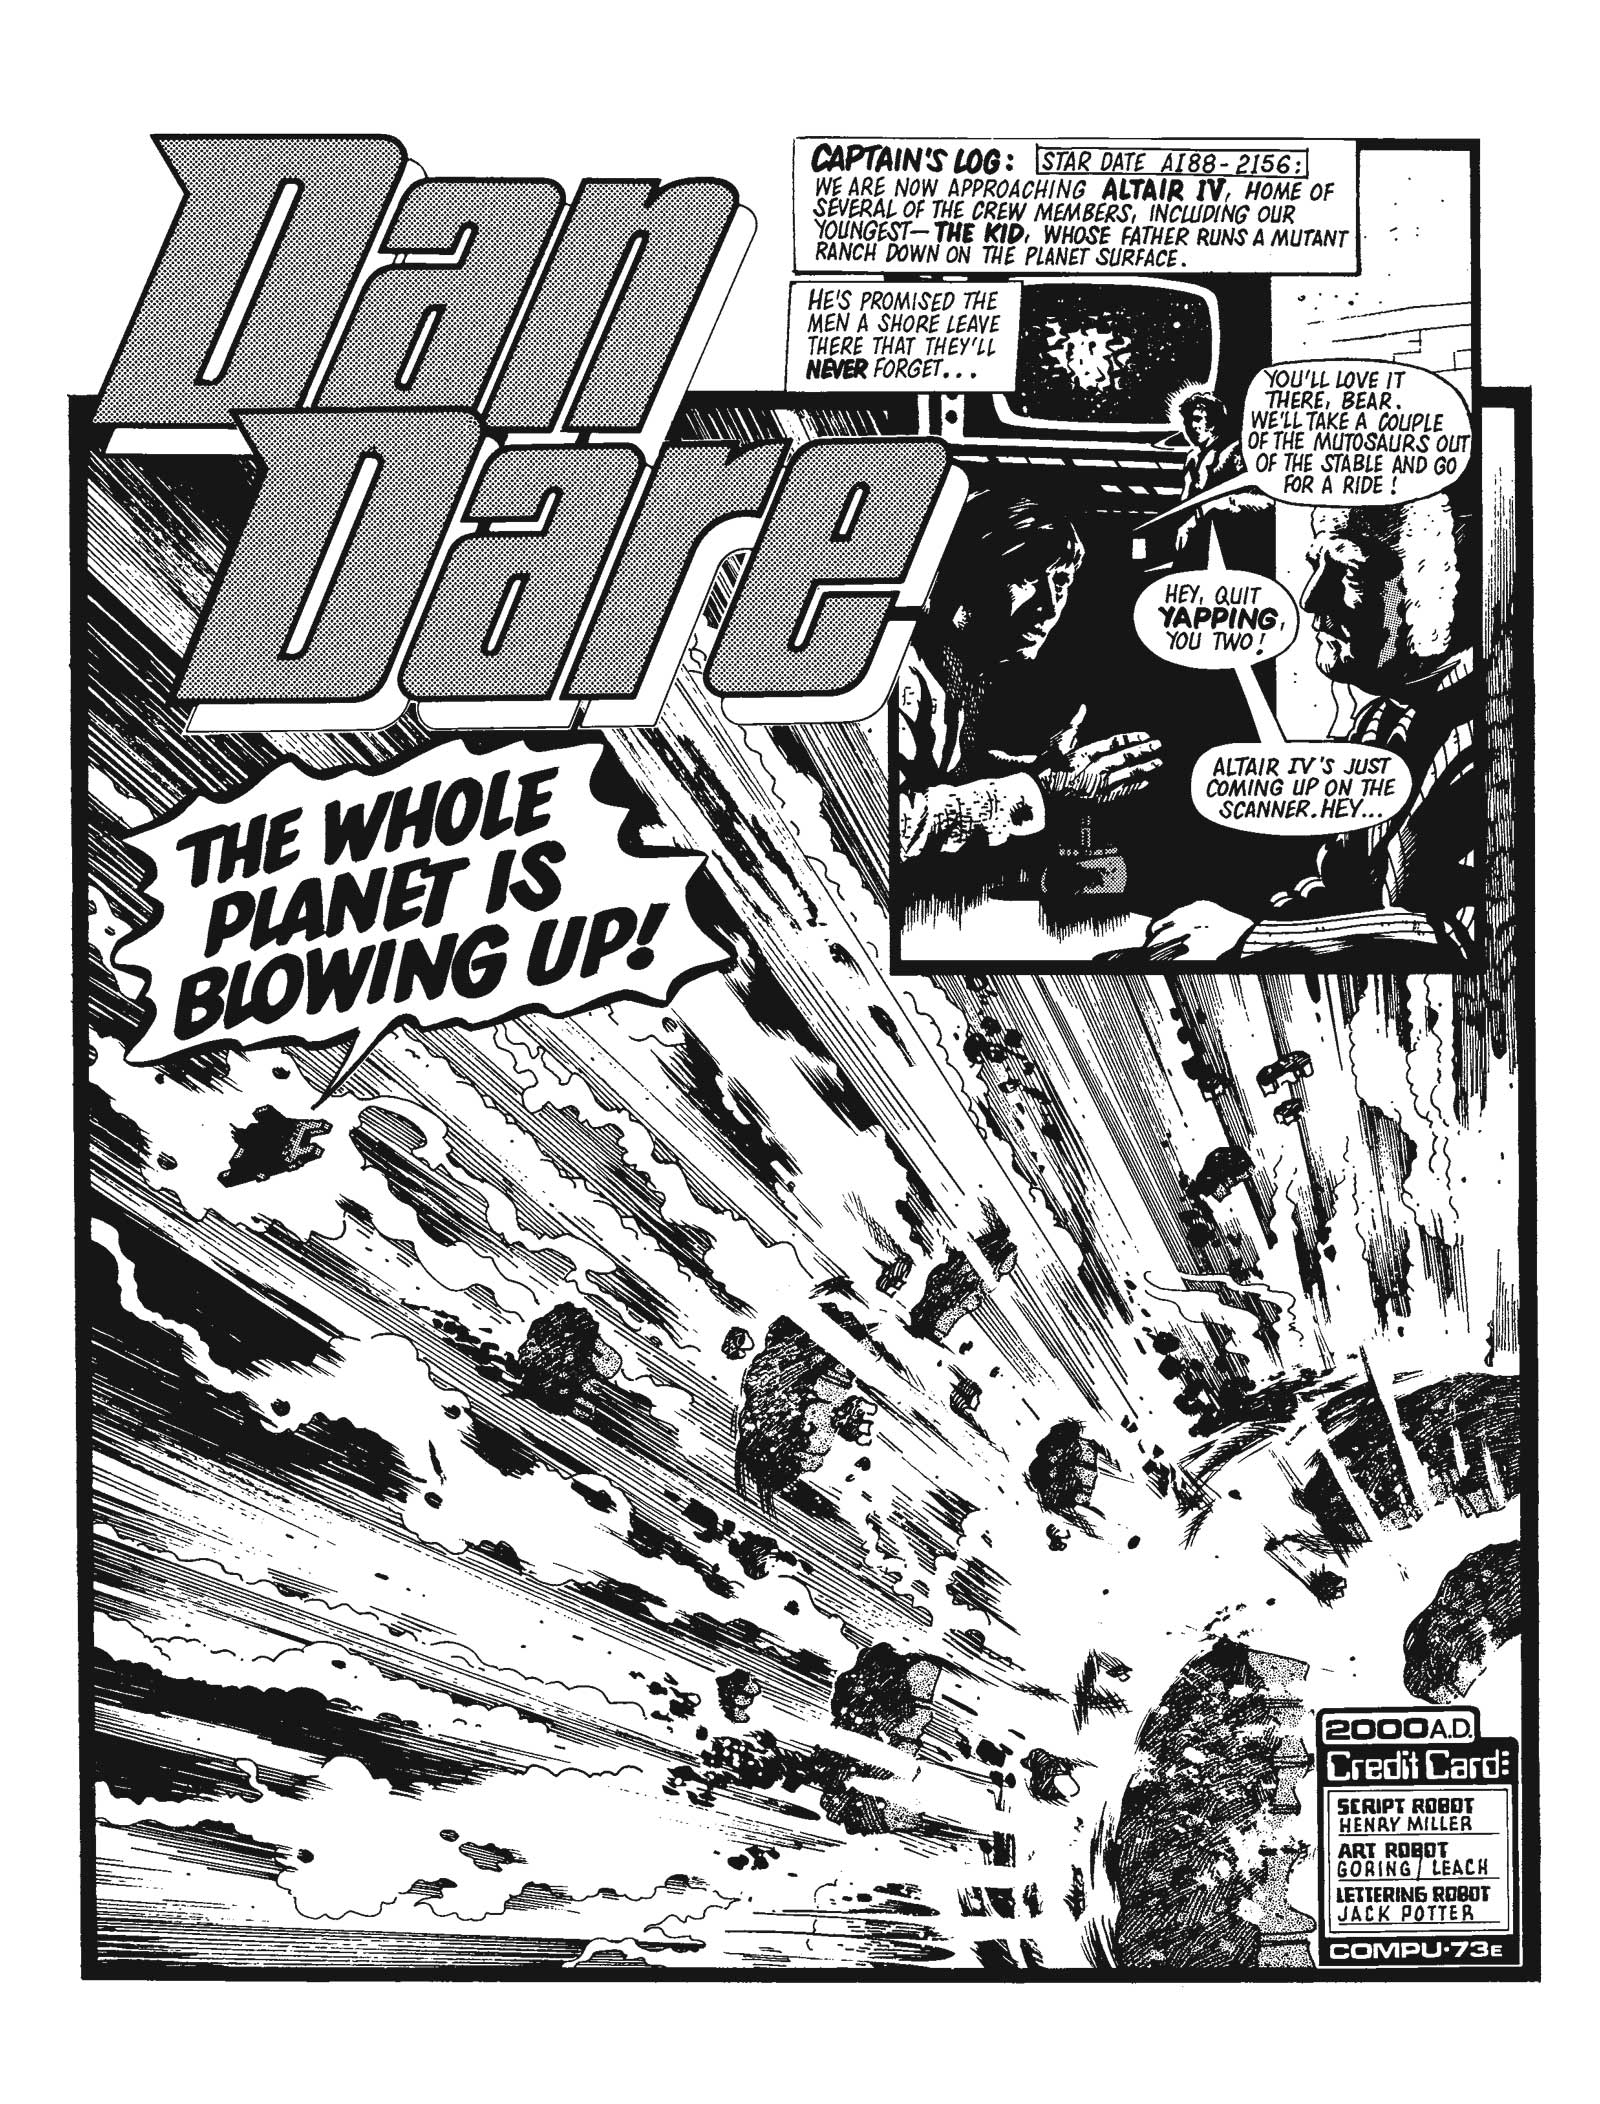 Dan Dare art for 2000AD, pencilled by Trevor Goring,  inked by Garry Leach